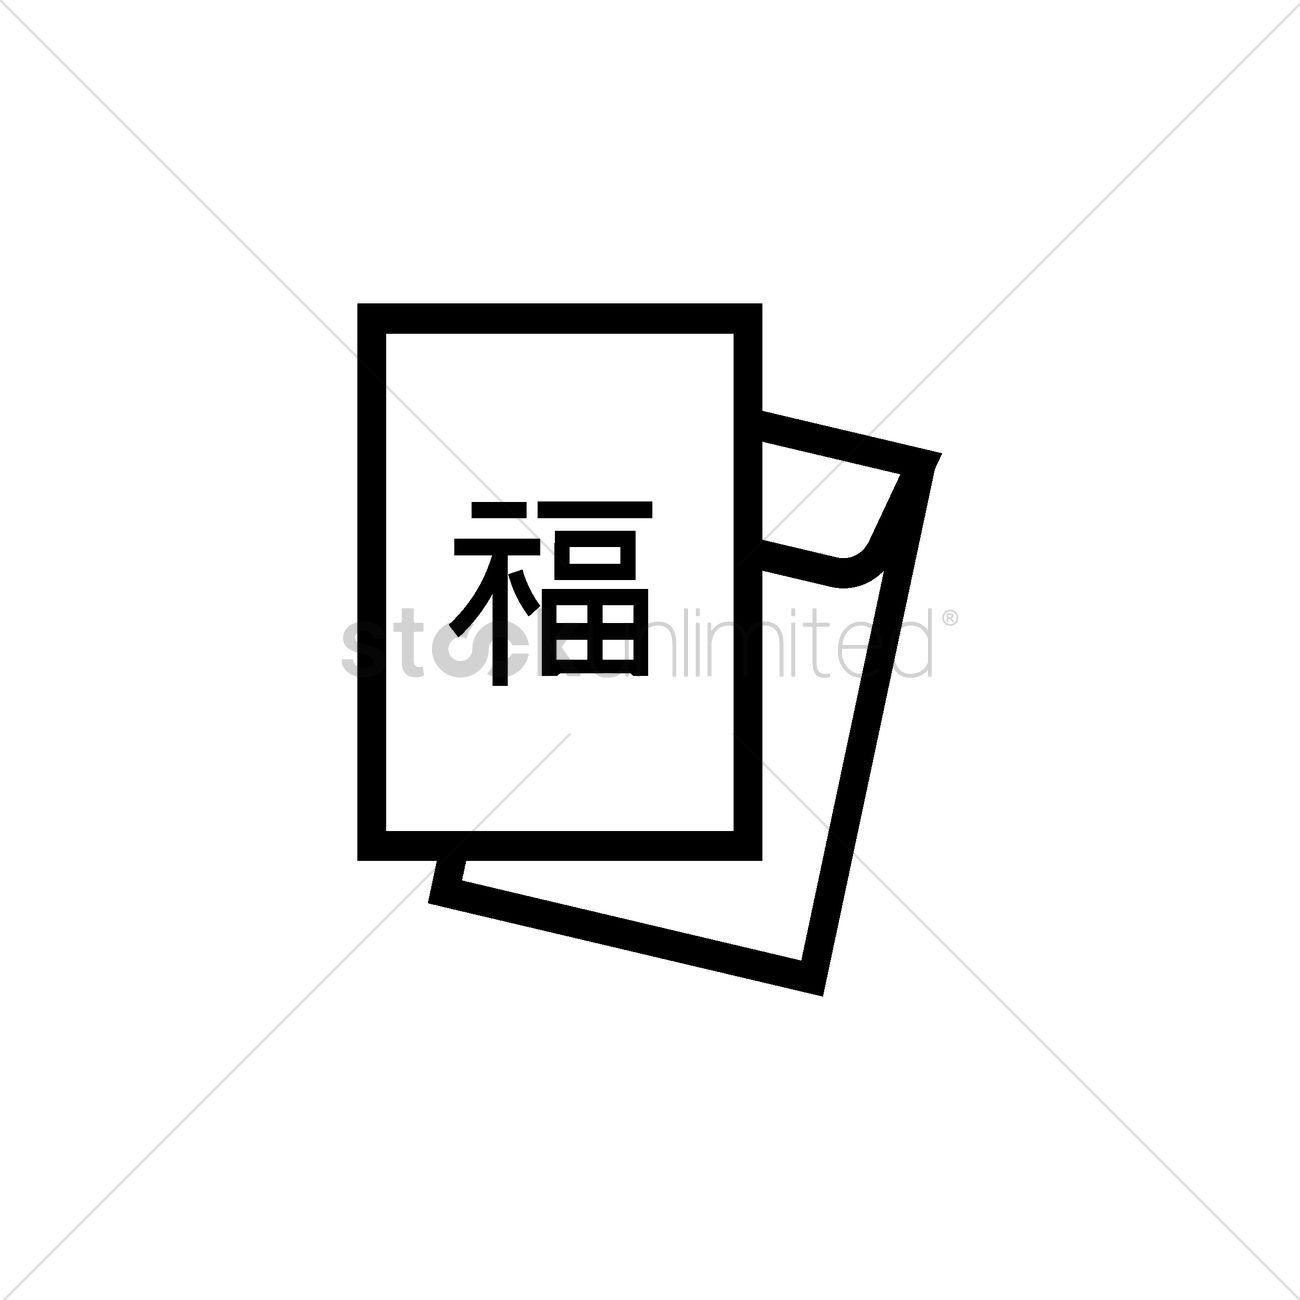 Looks Like White and Red Envelope Logo - Chinese new year red envelope Vector Image - 1967448 | StockUnlimited